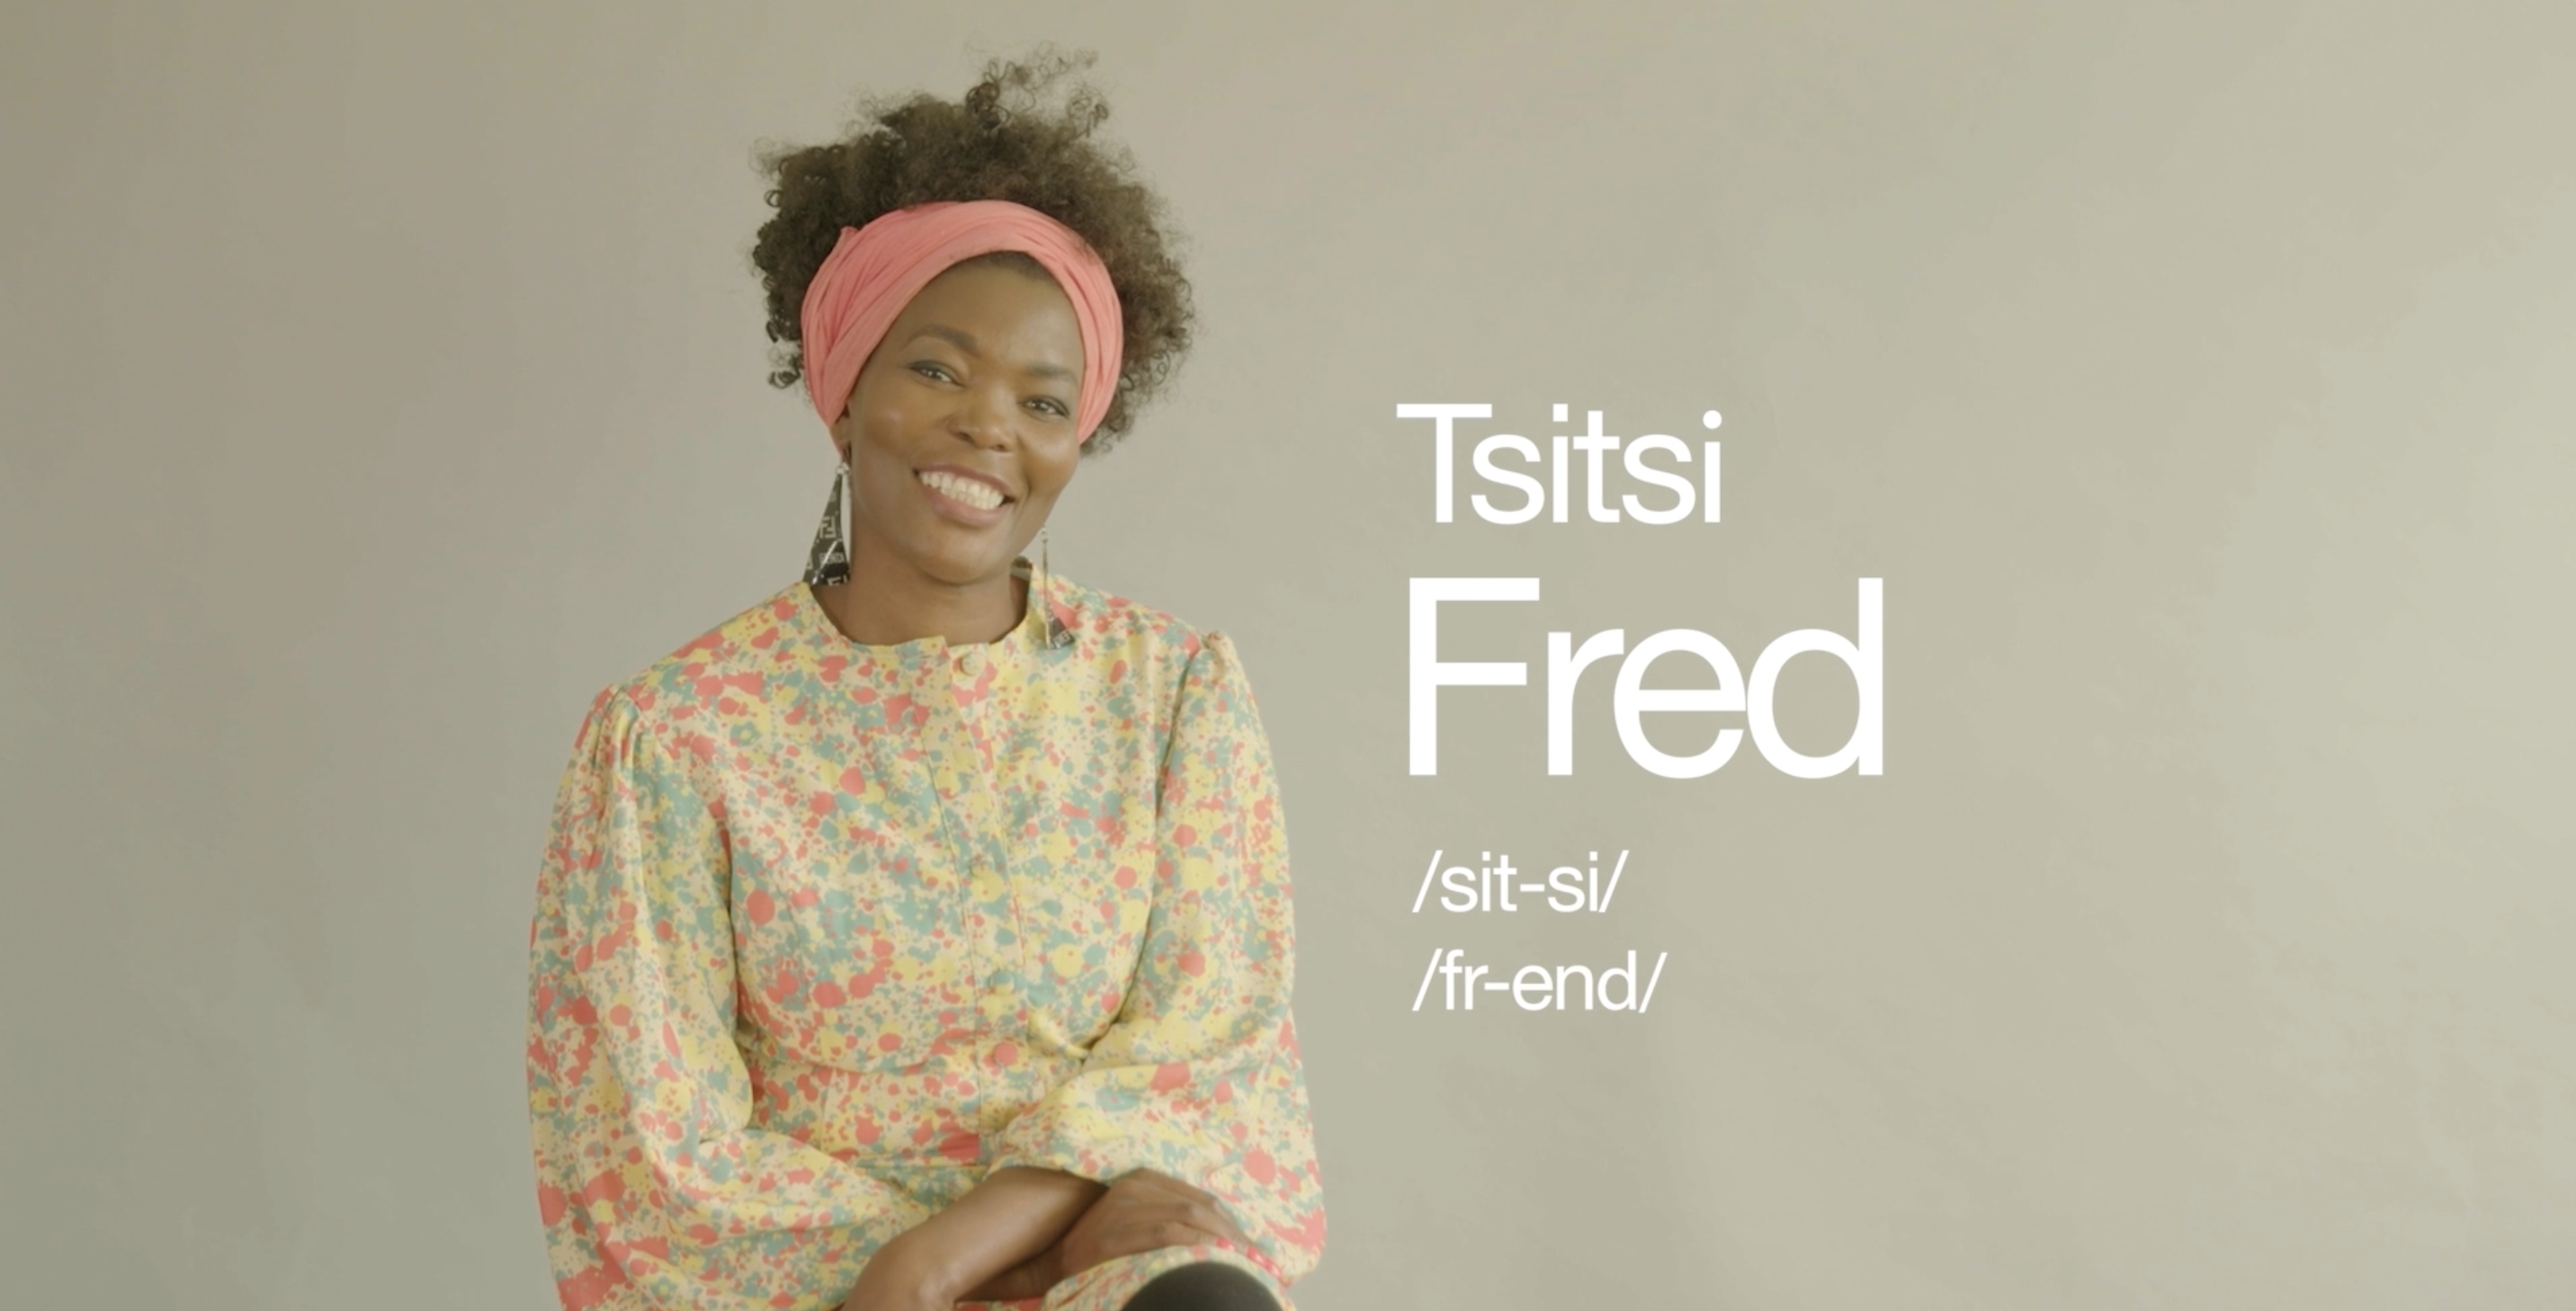 A still taken from 'Let Me introduce Myself' with Lecturer in Fashion Textiles Knit Creative, Tsitsi Fred. A short film by Sachan Popo-Williams featured in the Fashion Space Gallery Exhibition, Melanin Modalities in Fashion and Culture.